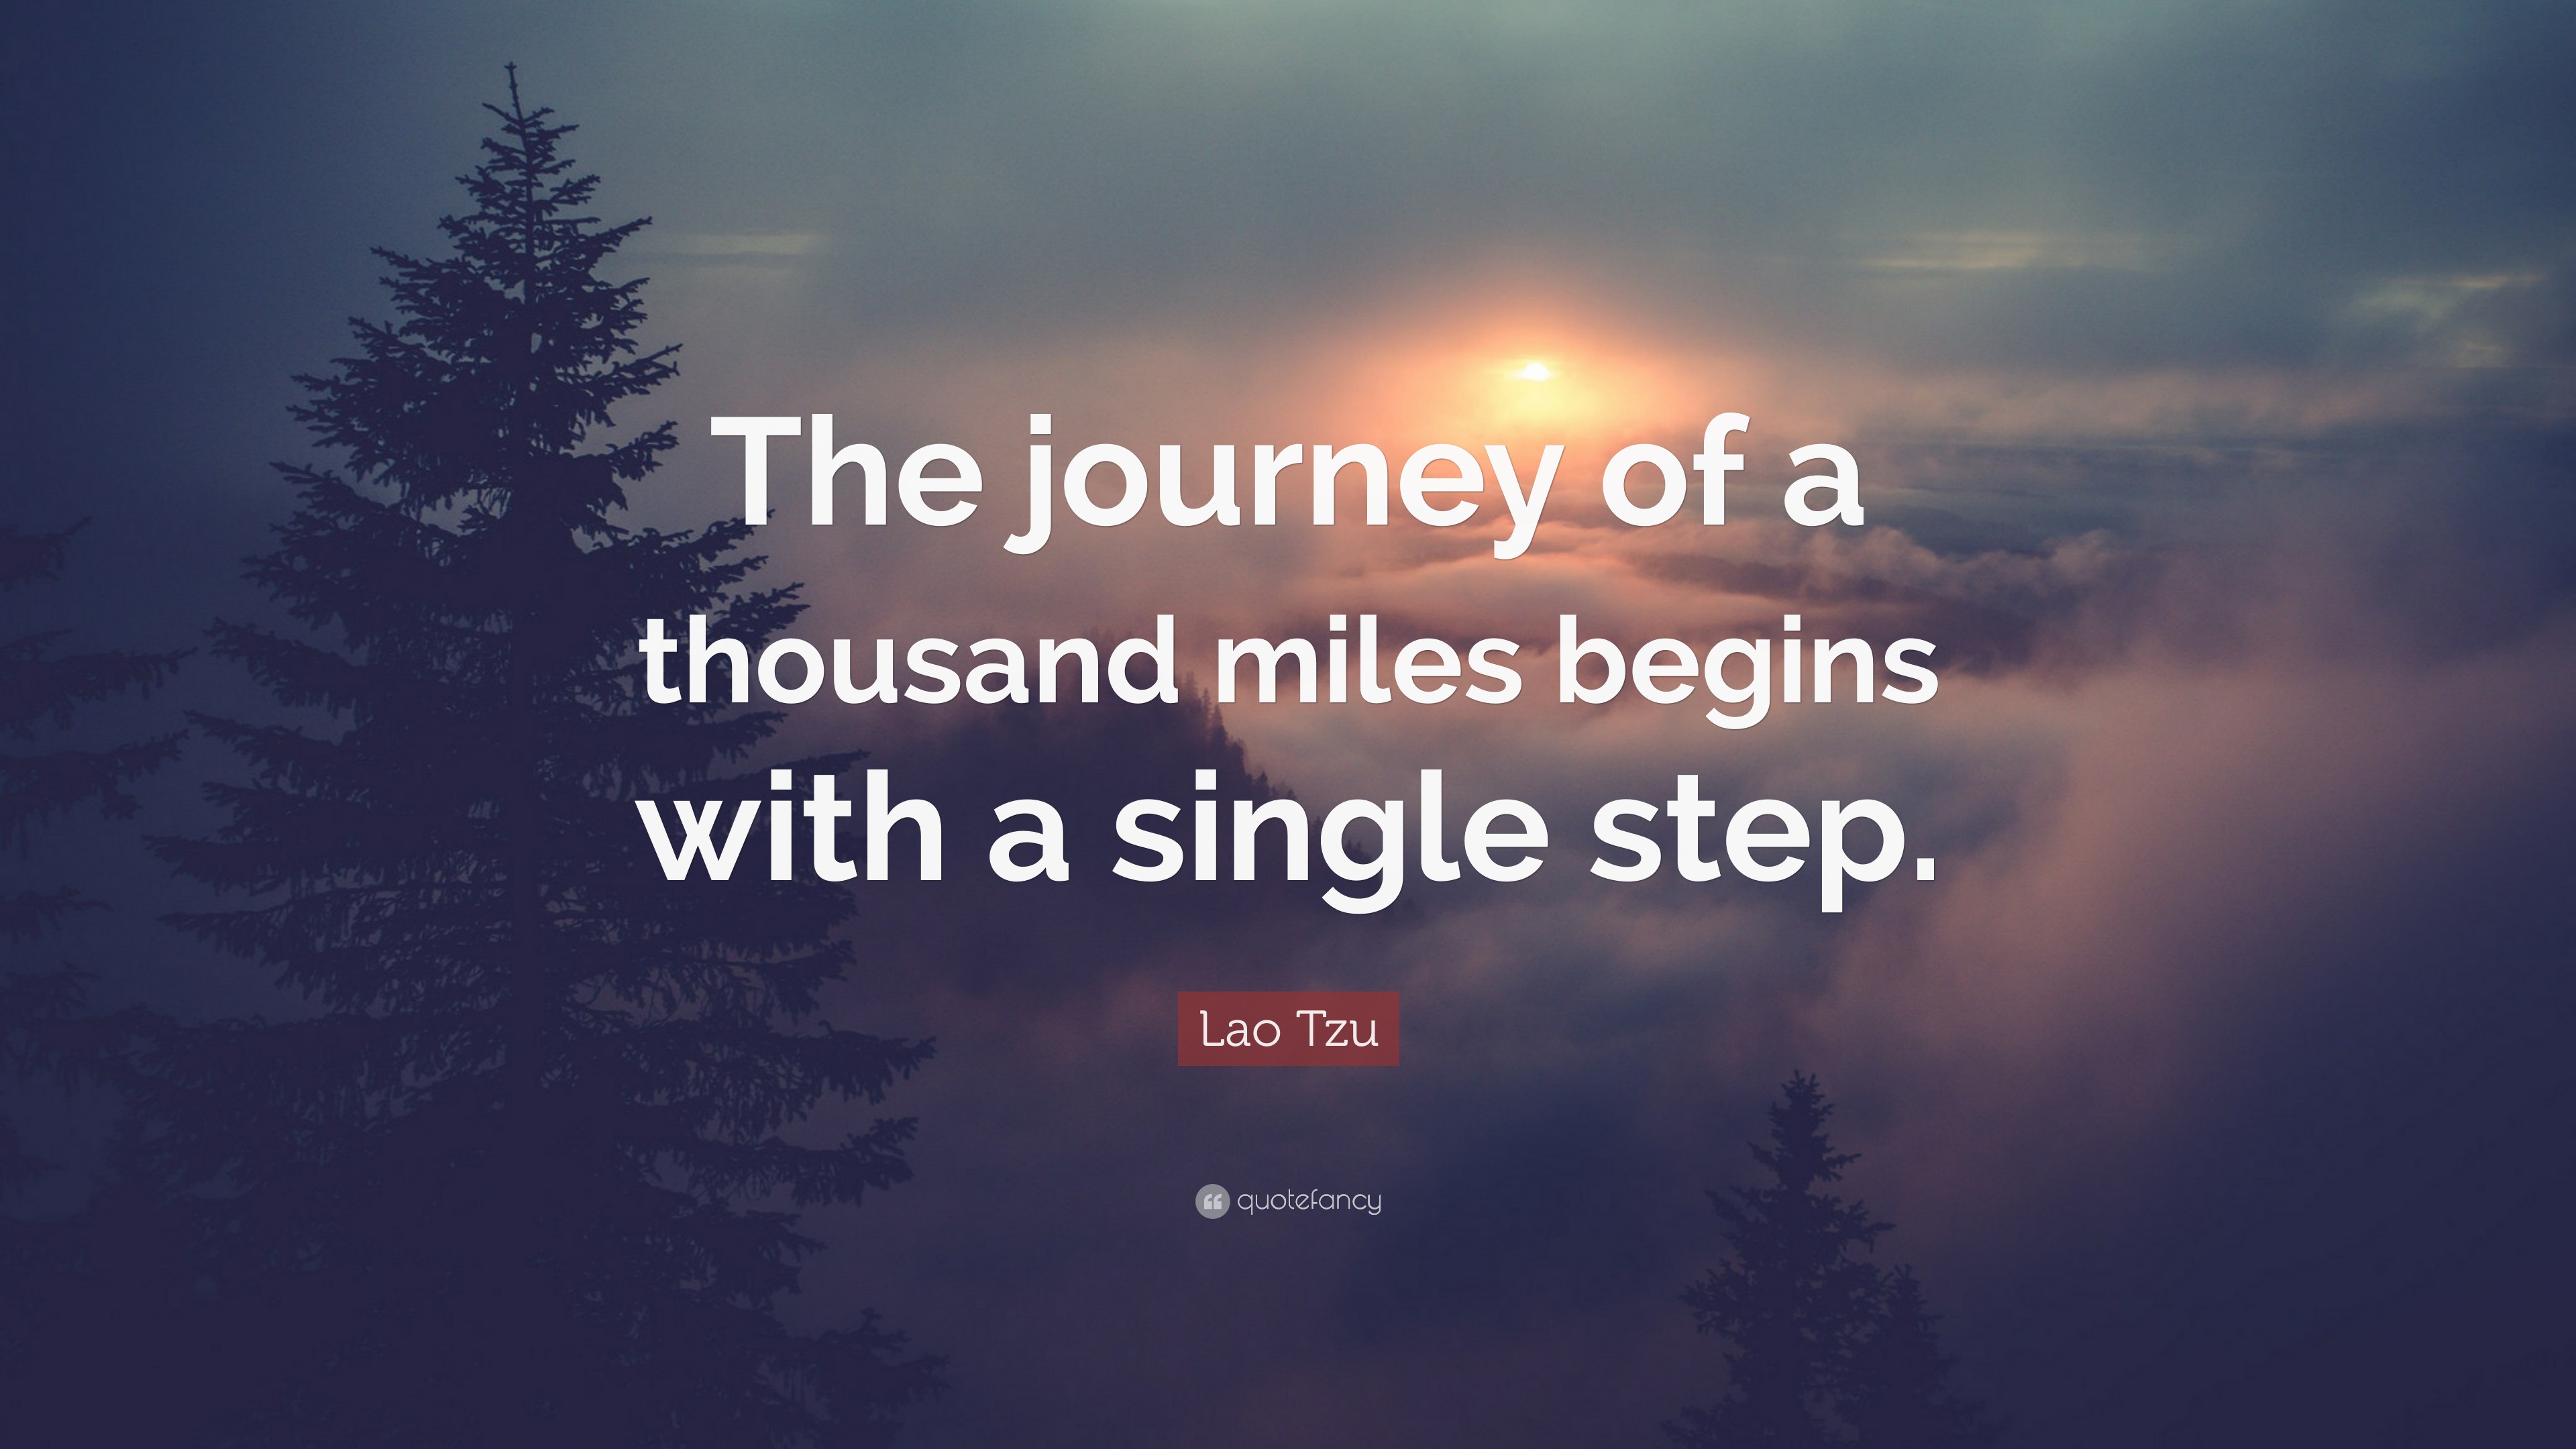 Lao Tzu Quote: “The journey of a thousand miles begins with a single ...